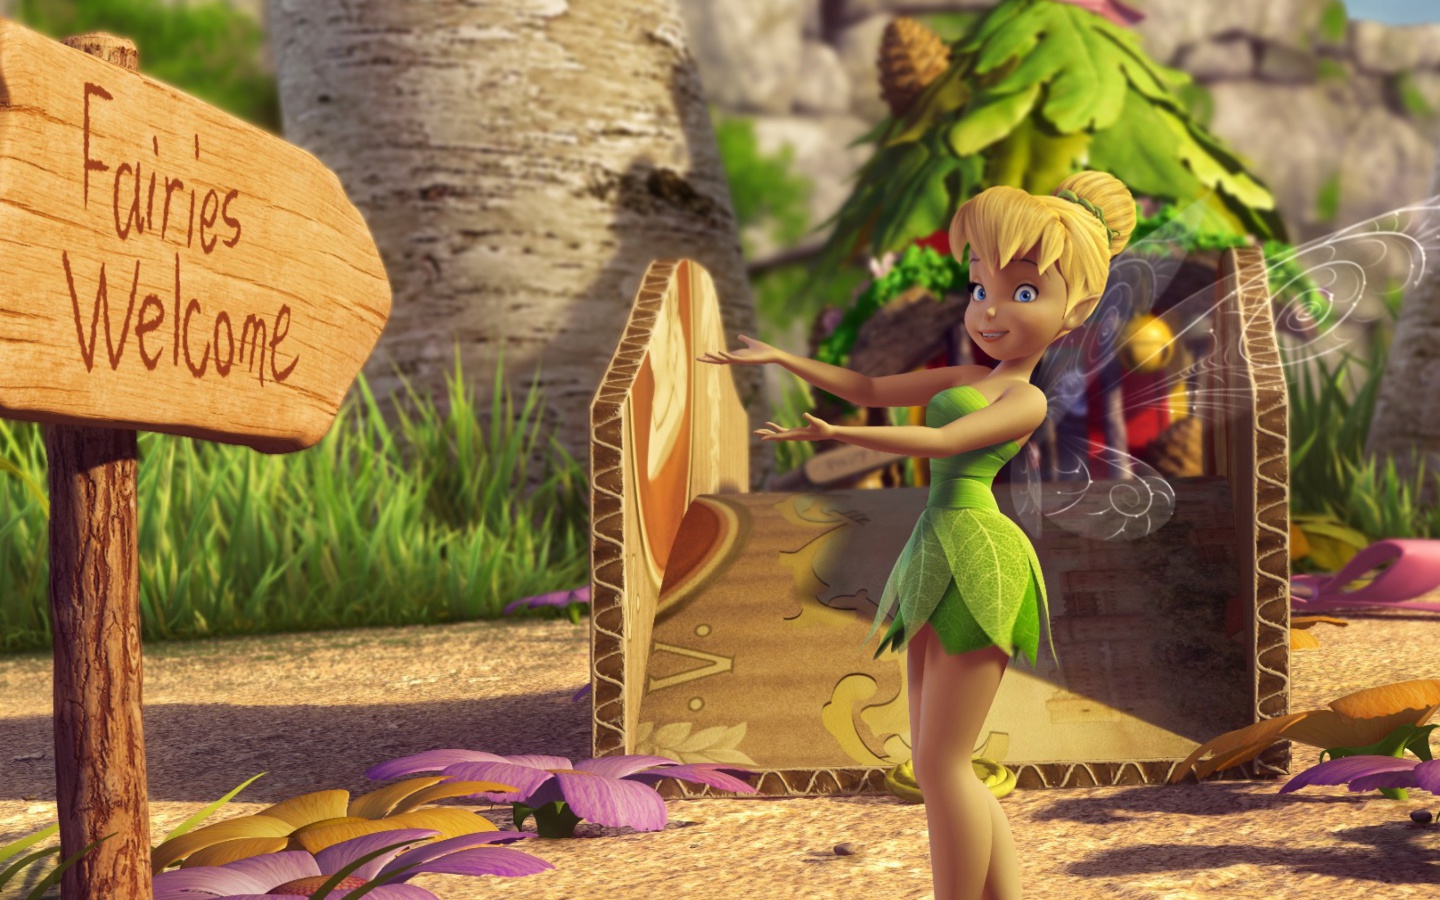 Das Tinker Bell And The Great Fairy Rescue 2 Wallpaper 1440x900